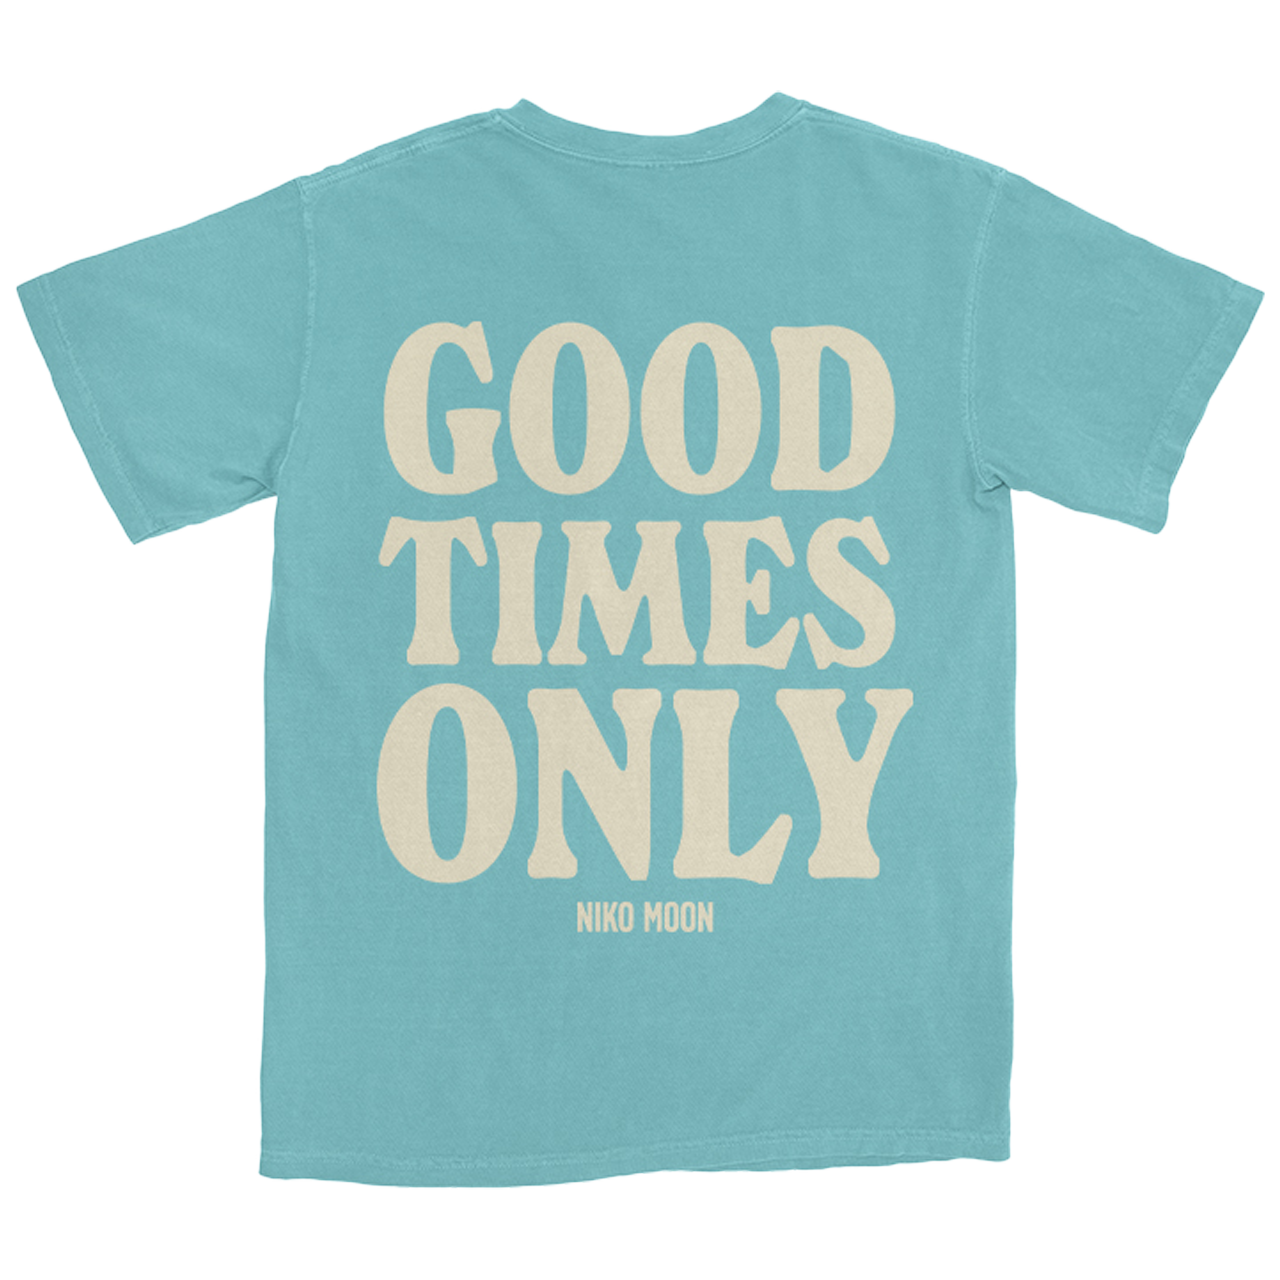 Good Times Only Tee - Teal